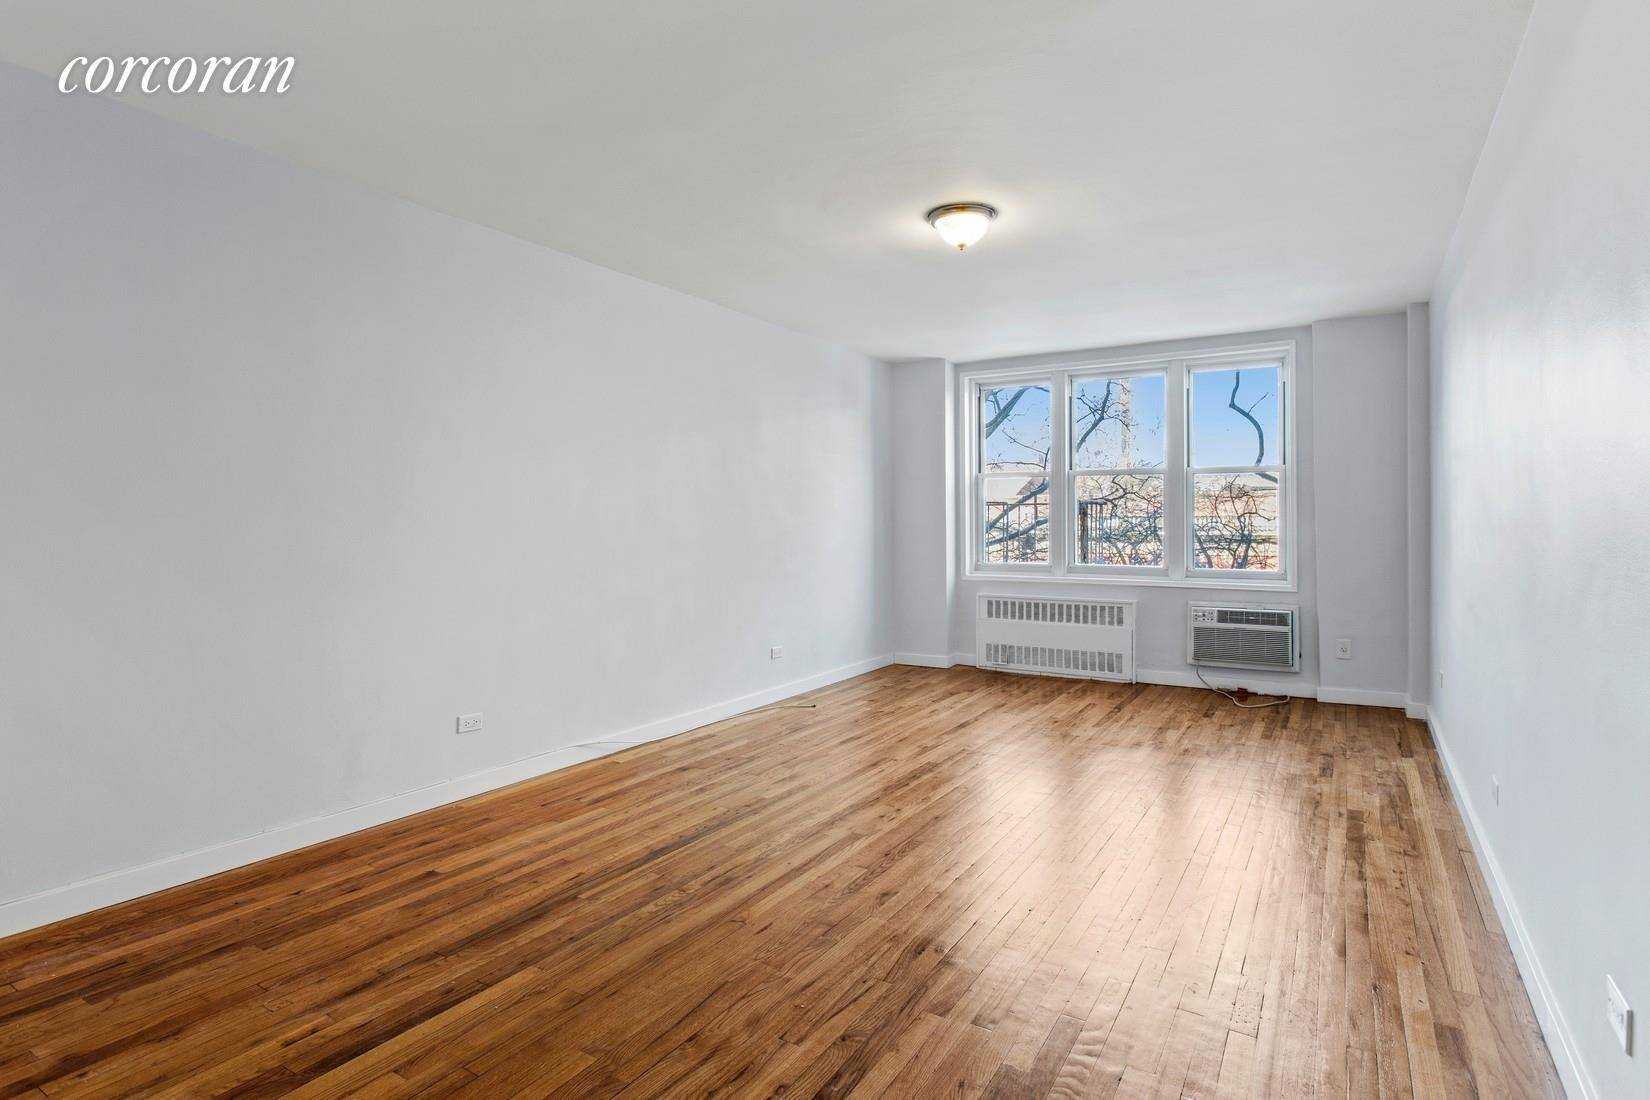 Situated on a dreamy quiet block in the fruit streets, the unit has large rooms, built in a c and the kitchen and bathroom were recently renovated.